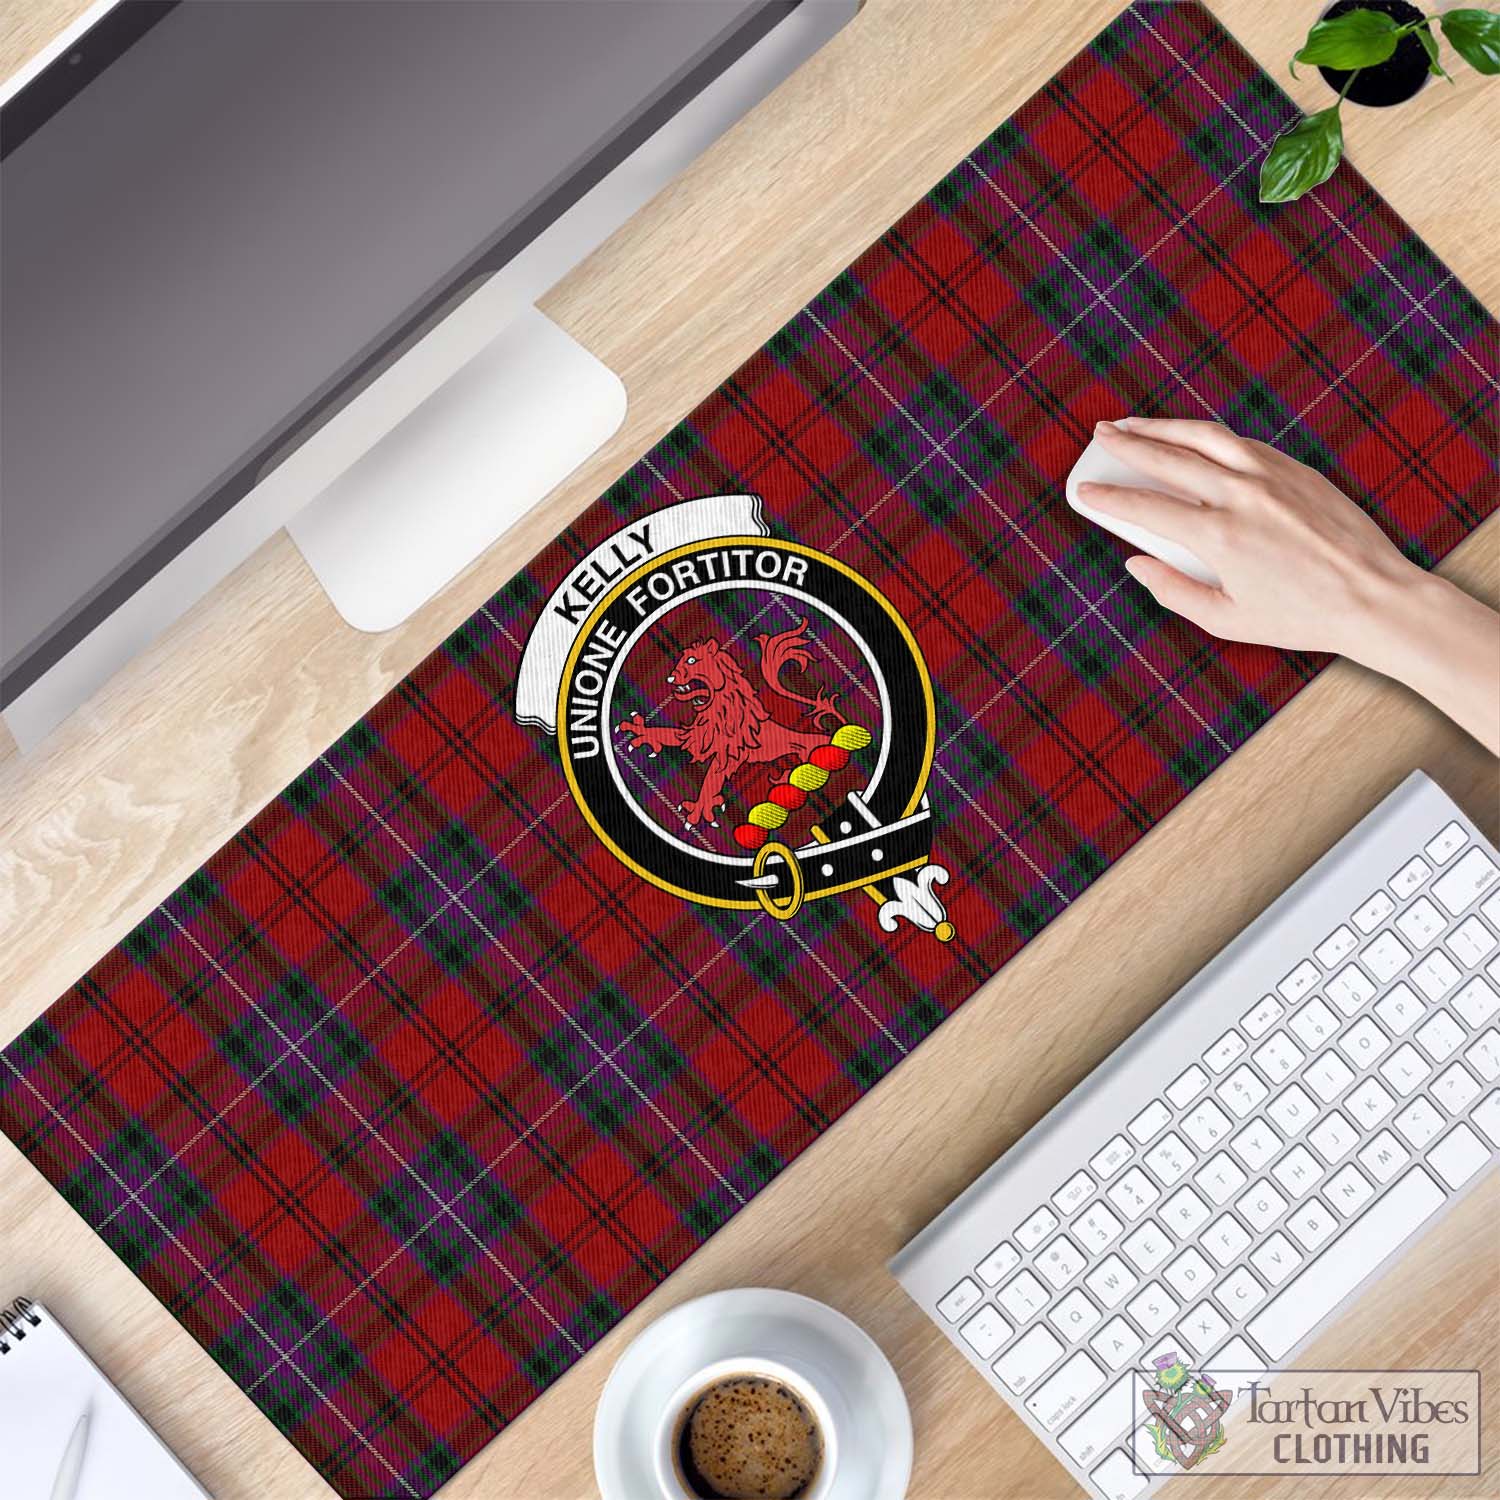 Tartan Vibes Clothing Kelly of Sleat Red Tartan Mouse Pad with Family Crest